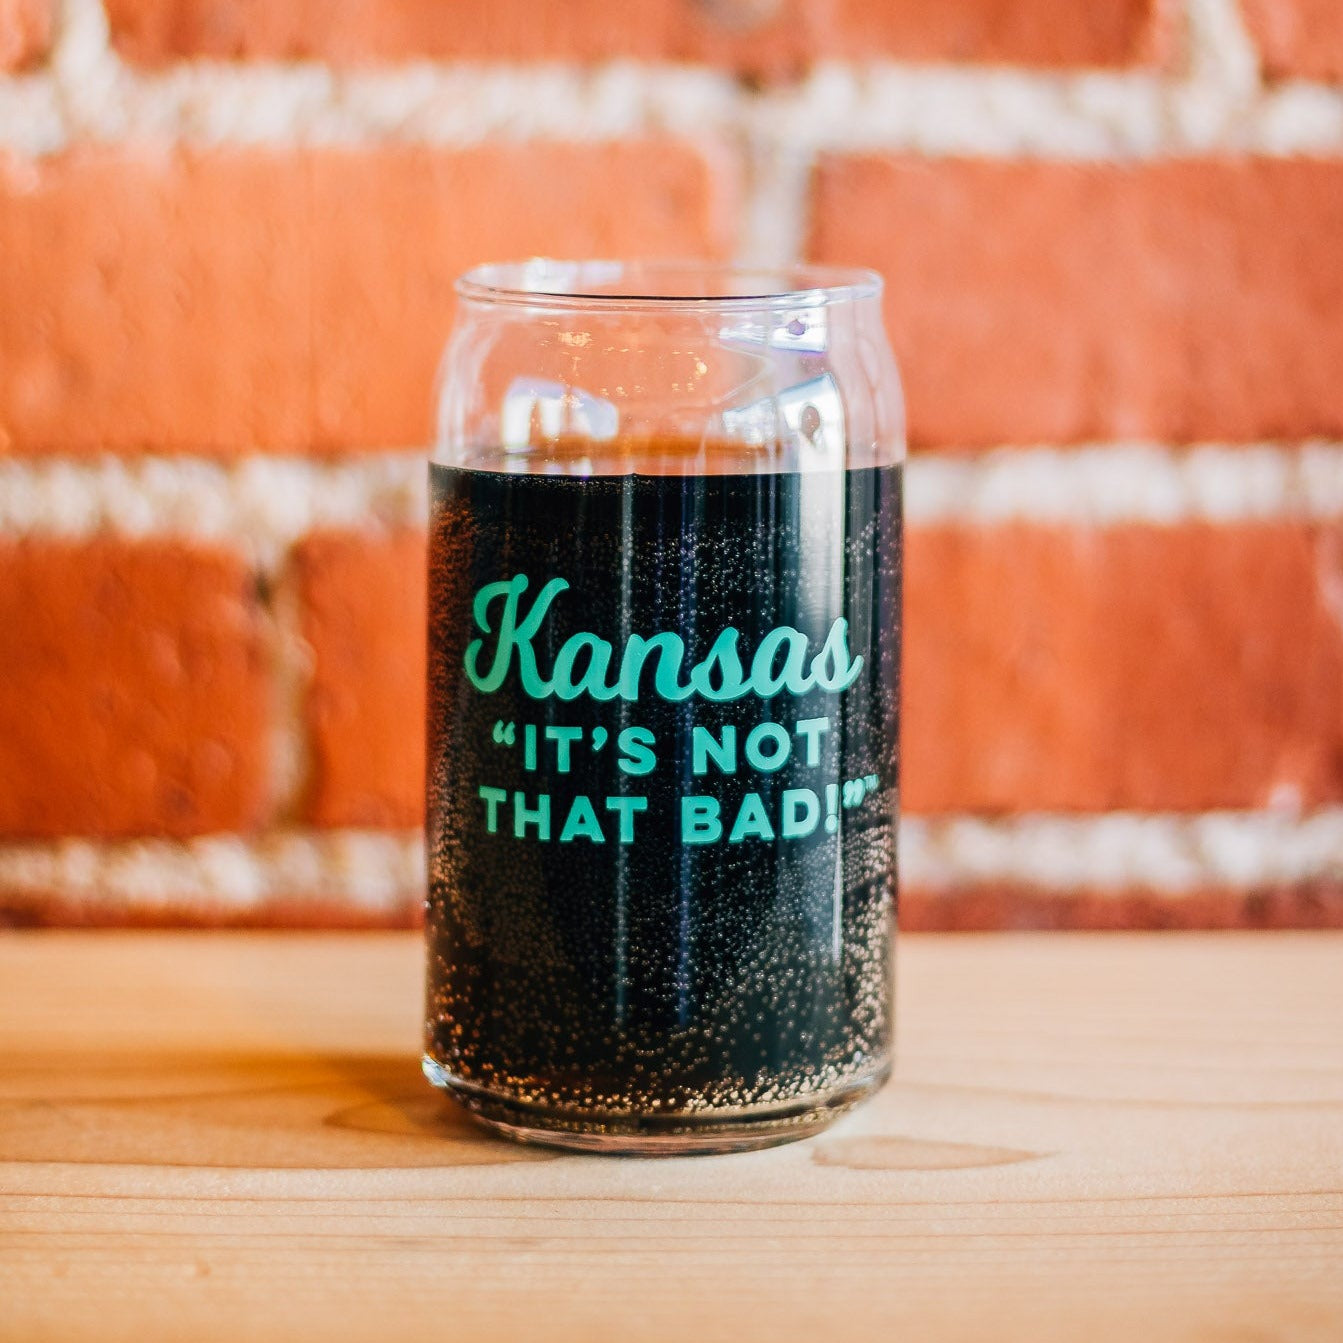 Kansas "It's Not That Bad" Green Can Glass